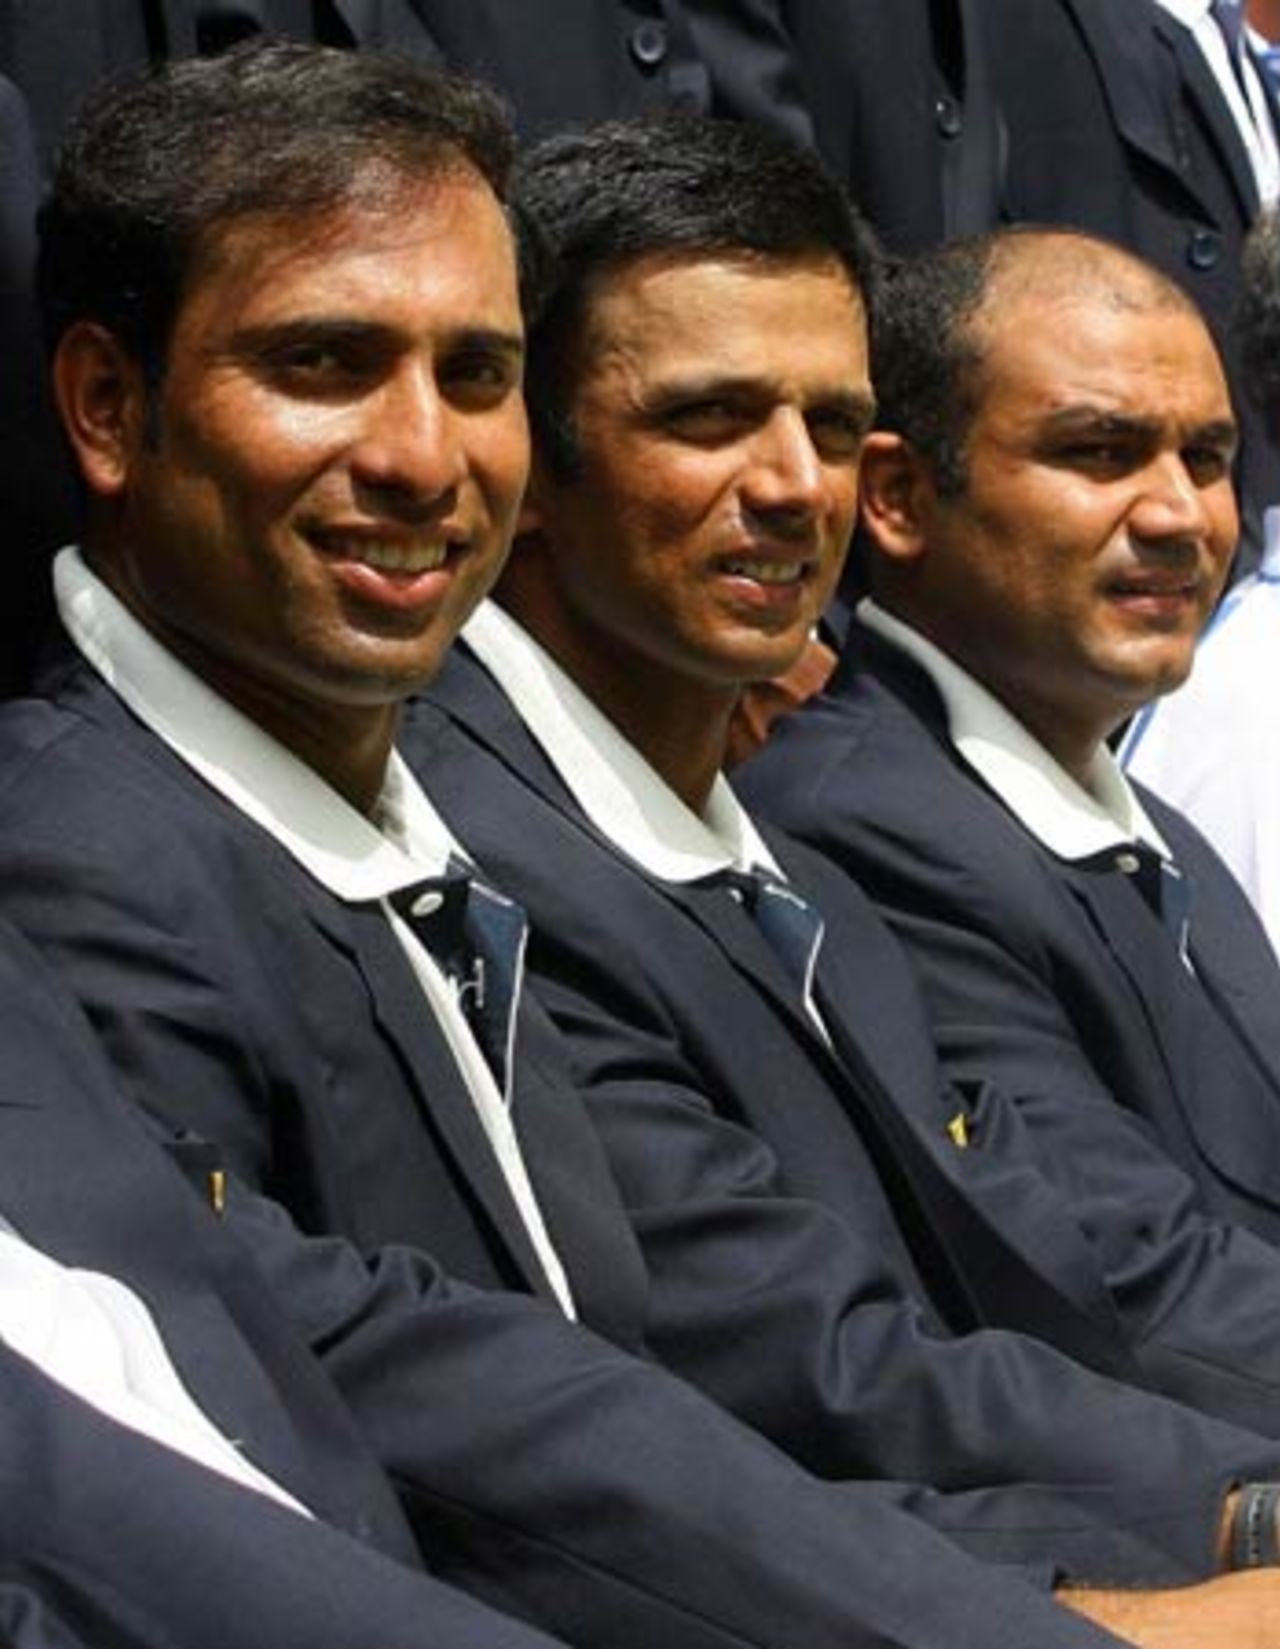 VVS Laxman, Rahul Dravid and Virender Sehwag are all smiles in the team photograph after India beat West Indies, July 3, 2005